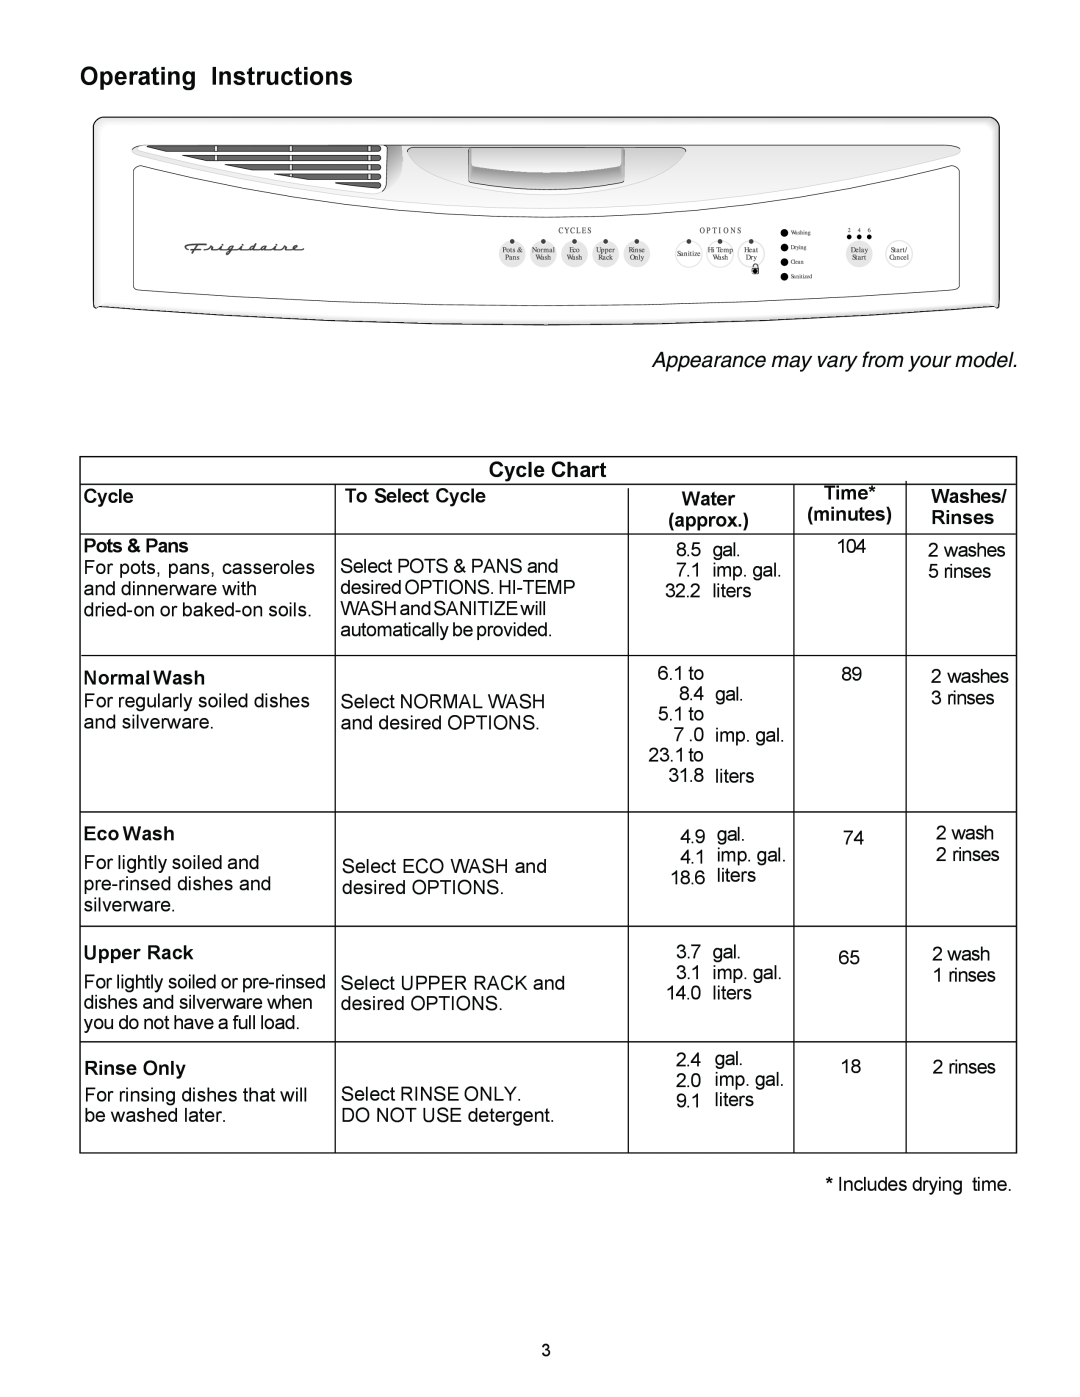 Frigidaire 1500 Series Operating Instructions, Appearance may vary from your model, Cycle Chart, To Select Cycle, Washes 